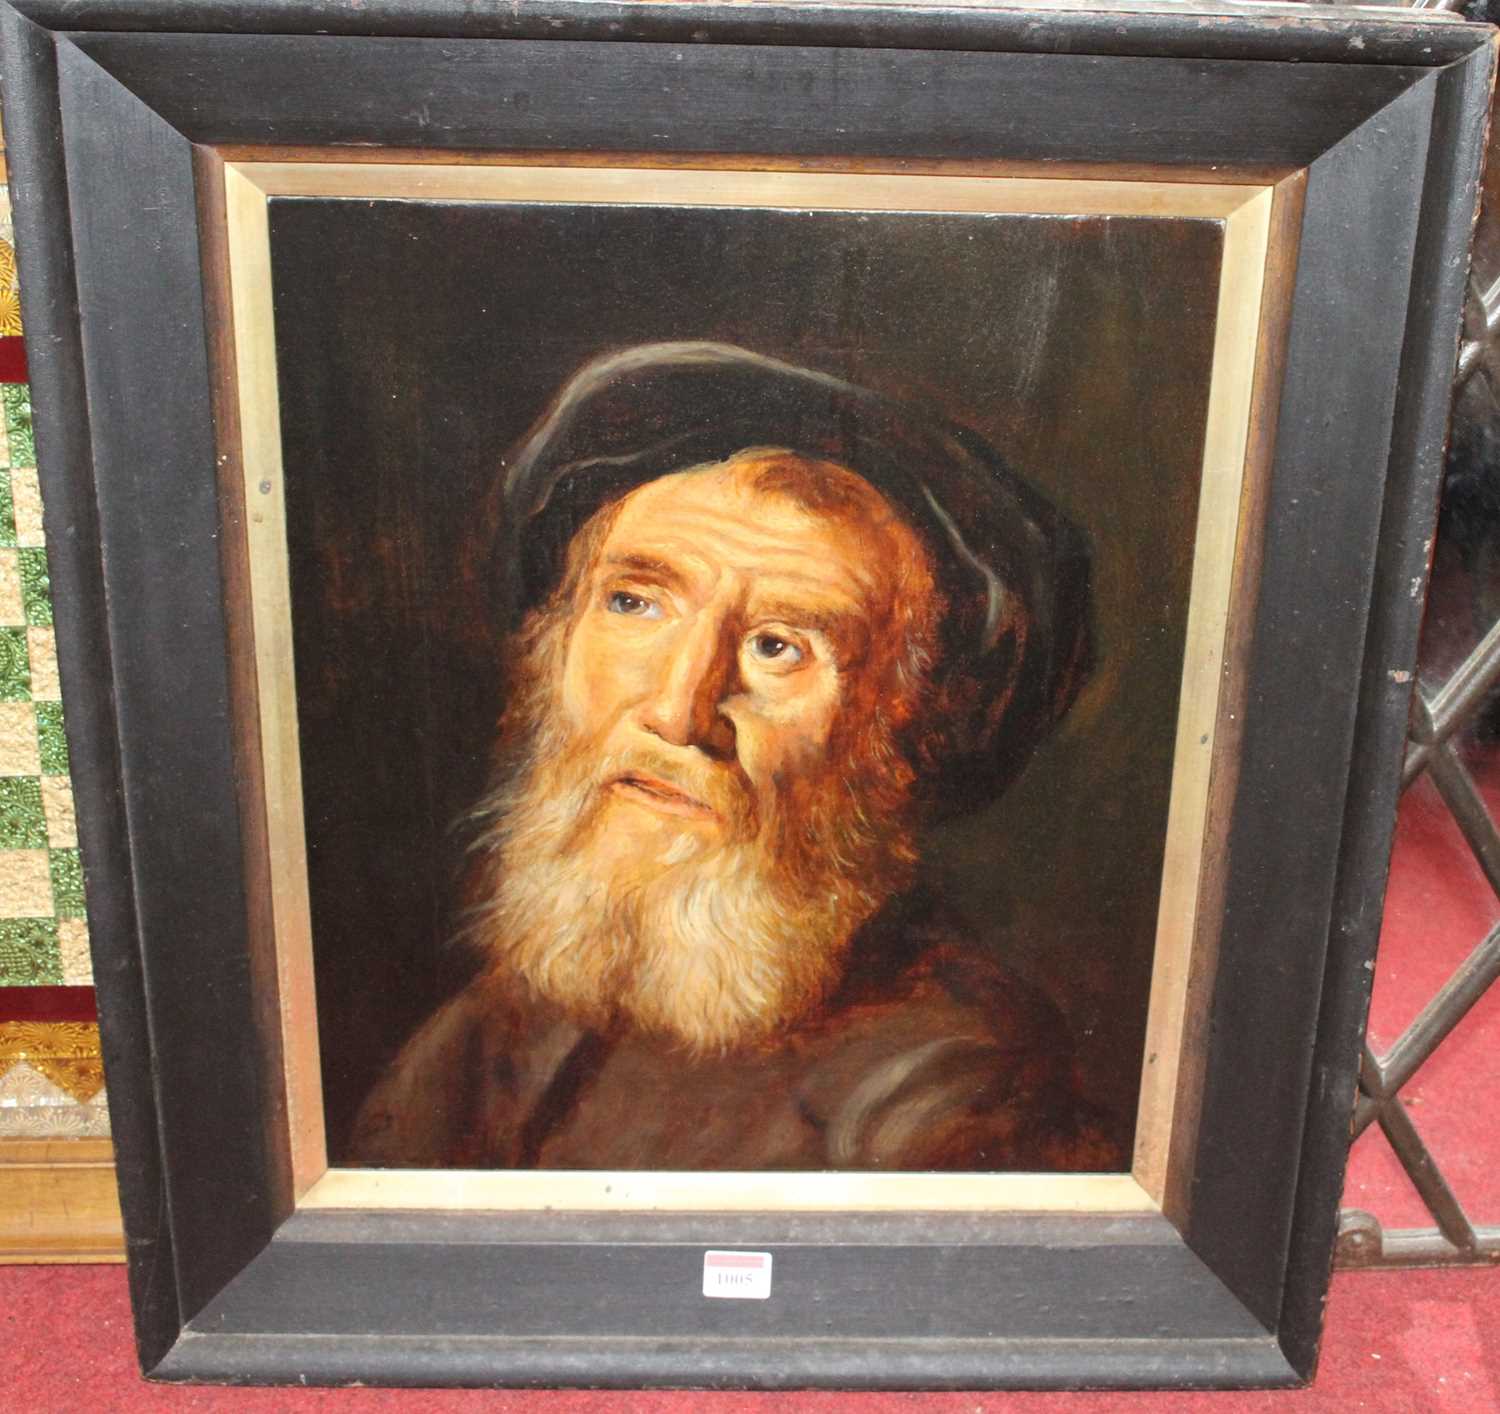 19th century continental school portrait of a bearded man, oil on canvas, indistinctly signed